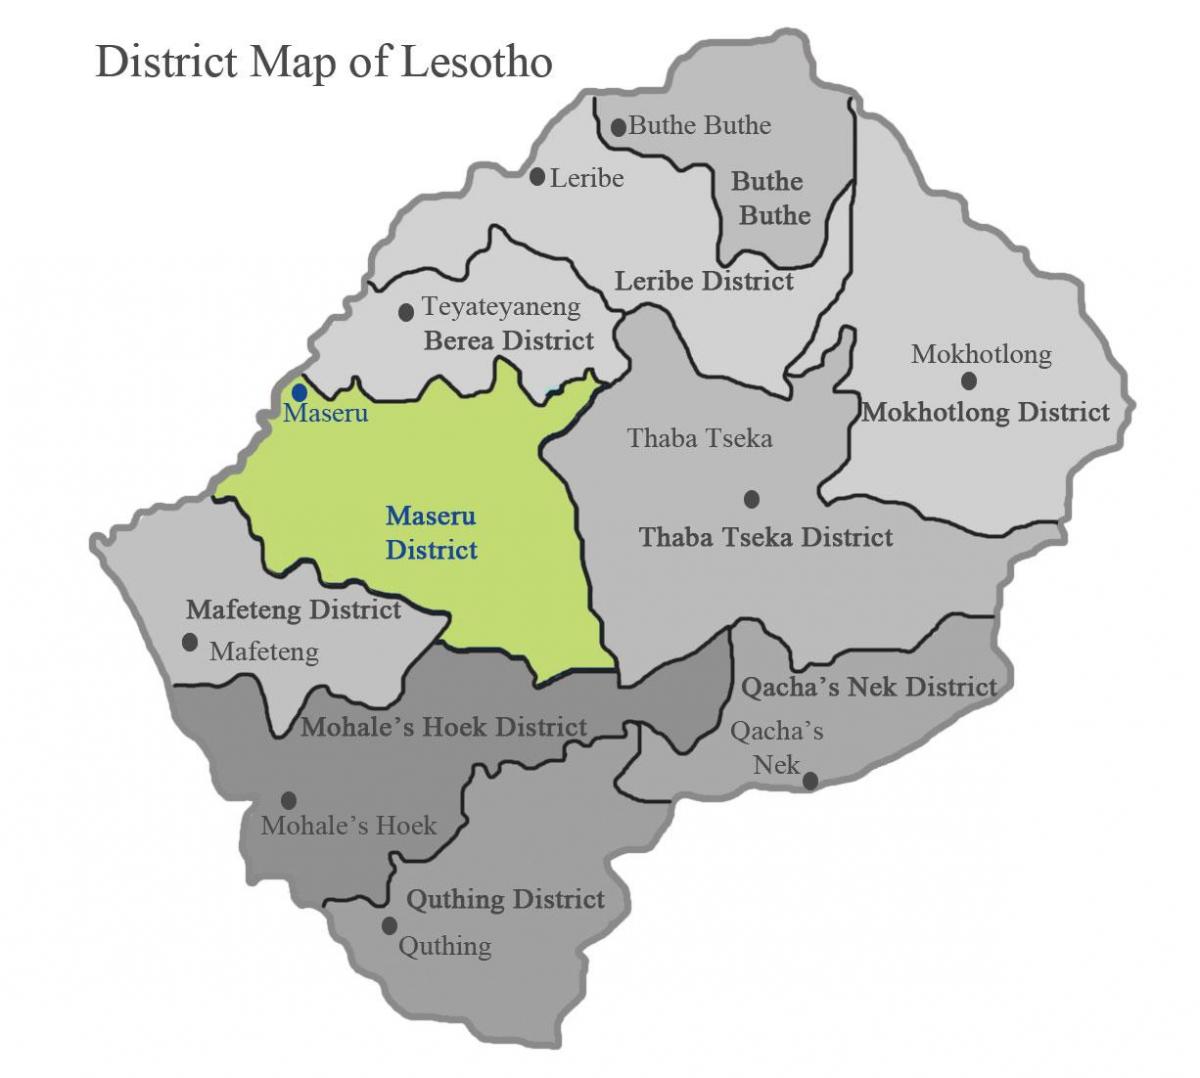 map of Lesotho showing districts